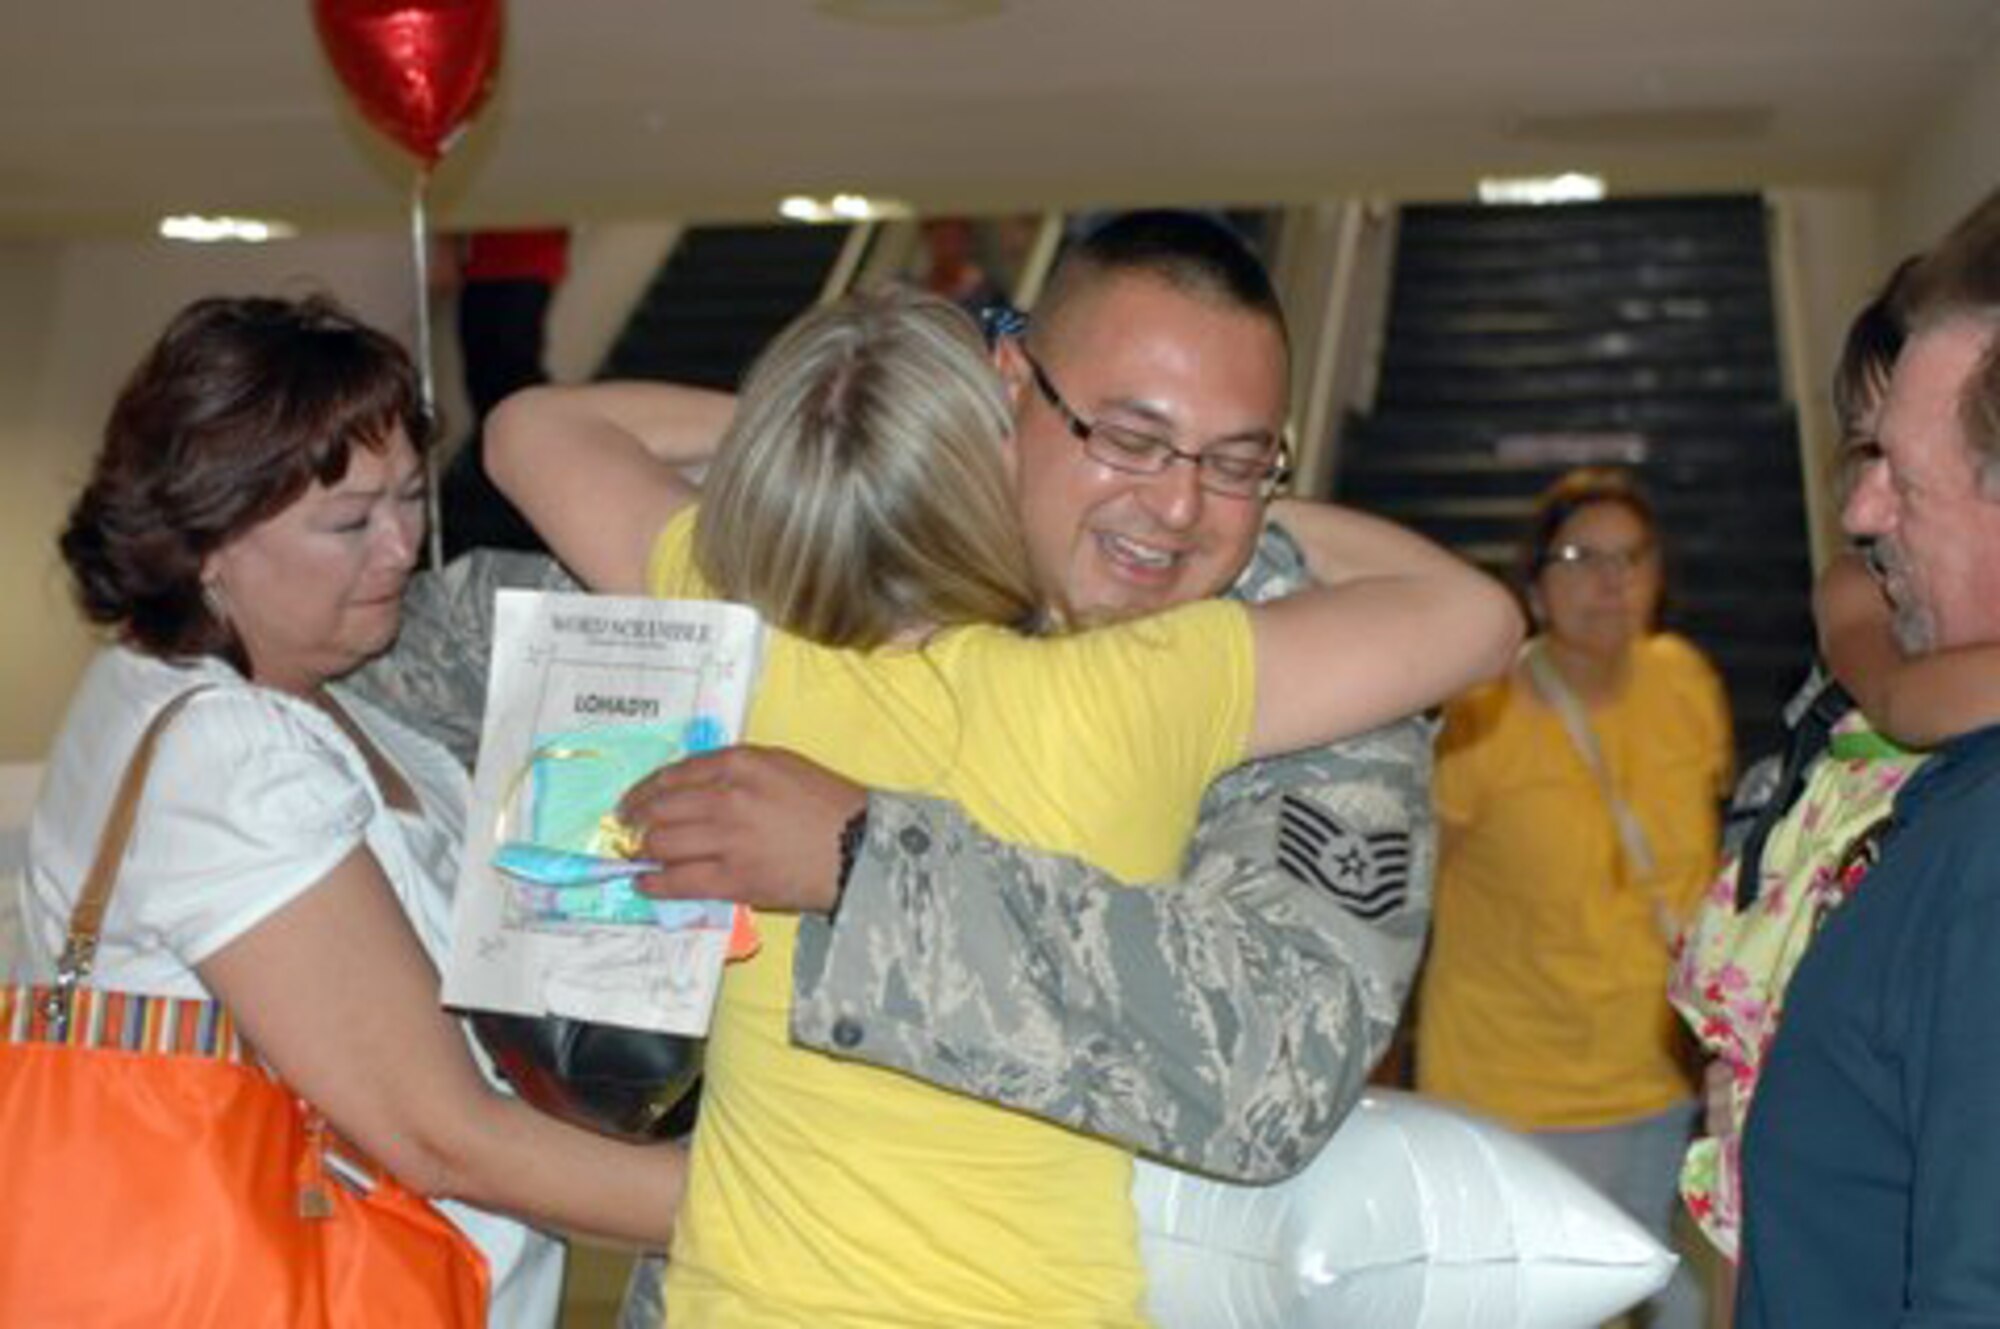 Tech. Sgt. Steve Heimbach, a maintainer with the 162nd Fighter Wing, is welcomed home by family and friends after a deployment to Iraq, July 1.  Wing families will soon benefit from the Yellow Ribbon Reintegration Program which is intended to ease pre-deployment, deployment and post-deployment issues for military families.  (Air Force photo by Barb Gavre)